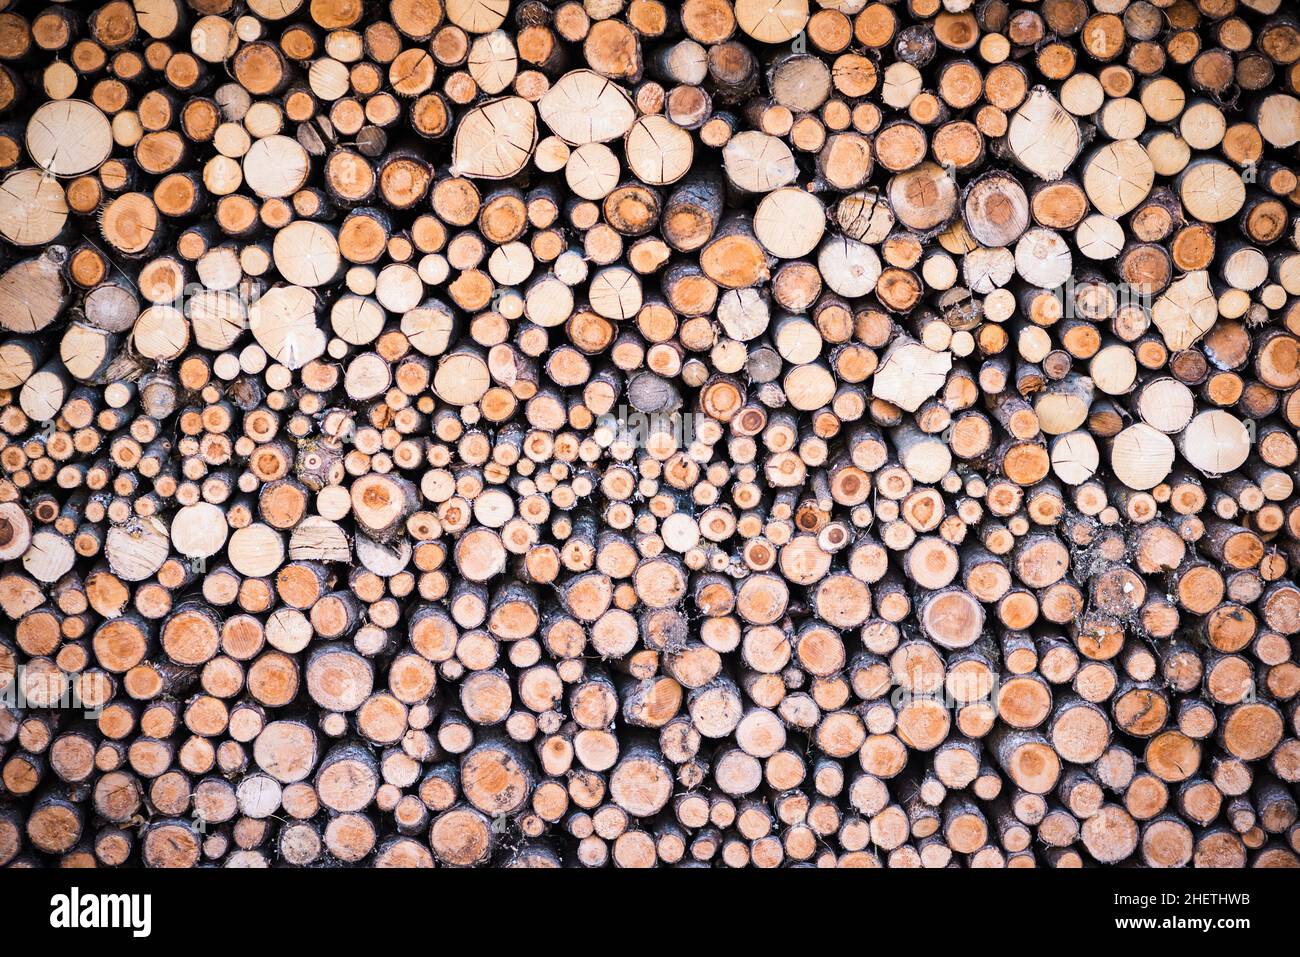 stack of round cutted firewood pieces as background texture Stock Photo